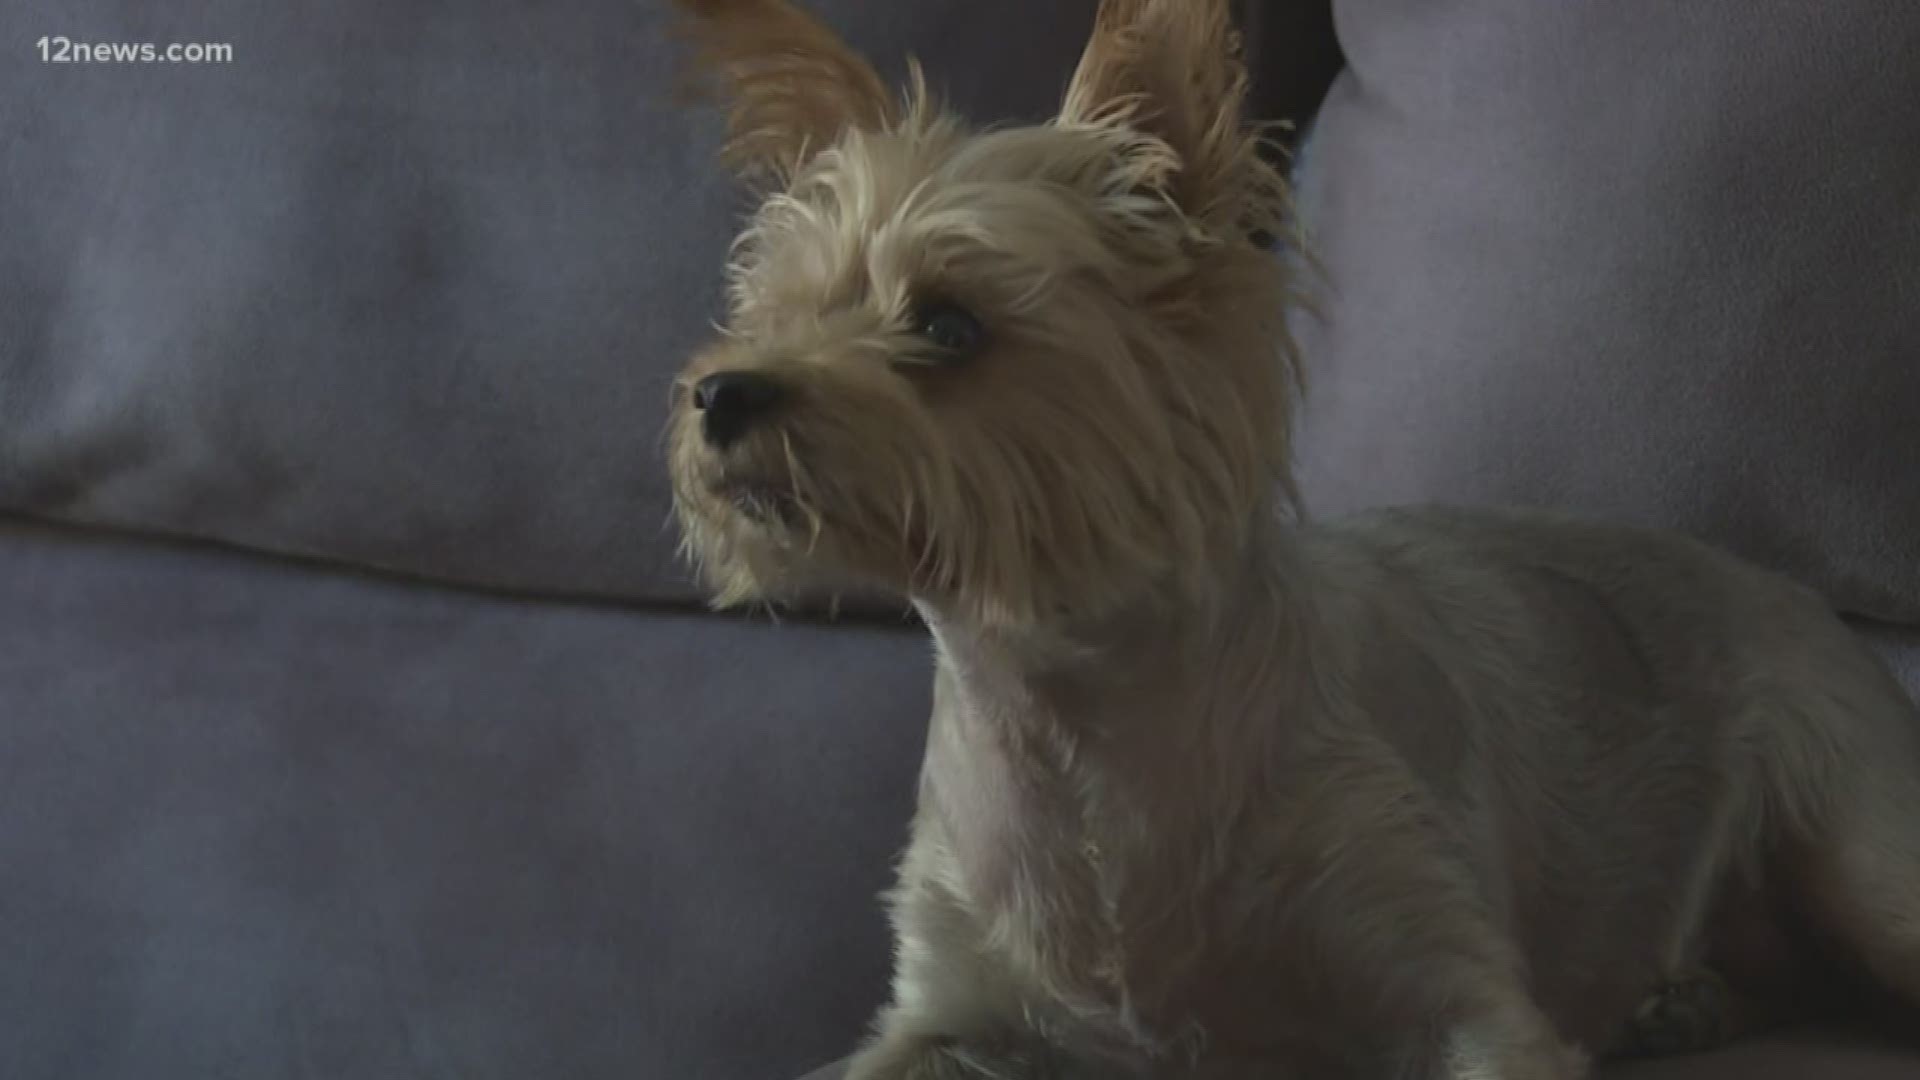 Allen Gobel said his Yorkie was attacked by a bobcat in his Ahwatukee neighborhood this past weekend. Team 12's Rachel Cole has the story.